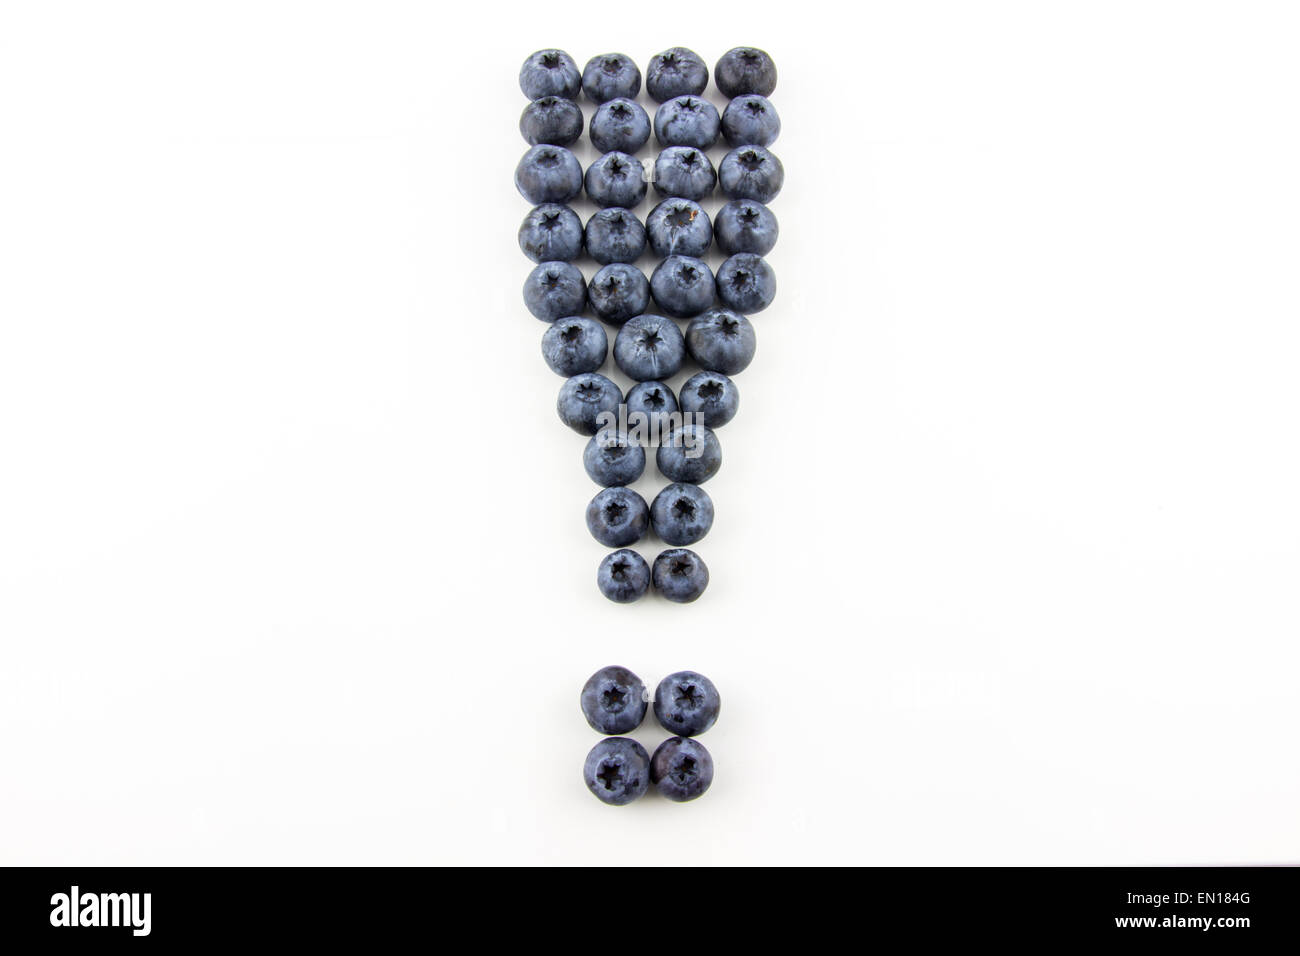 Exclamation mark concept made of fresh blueberries Stock Photo